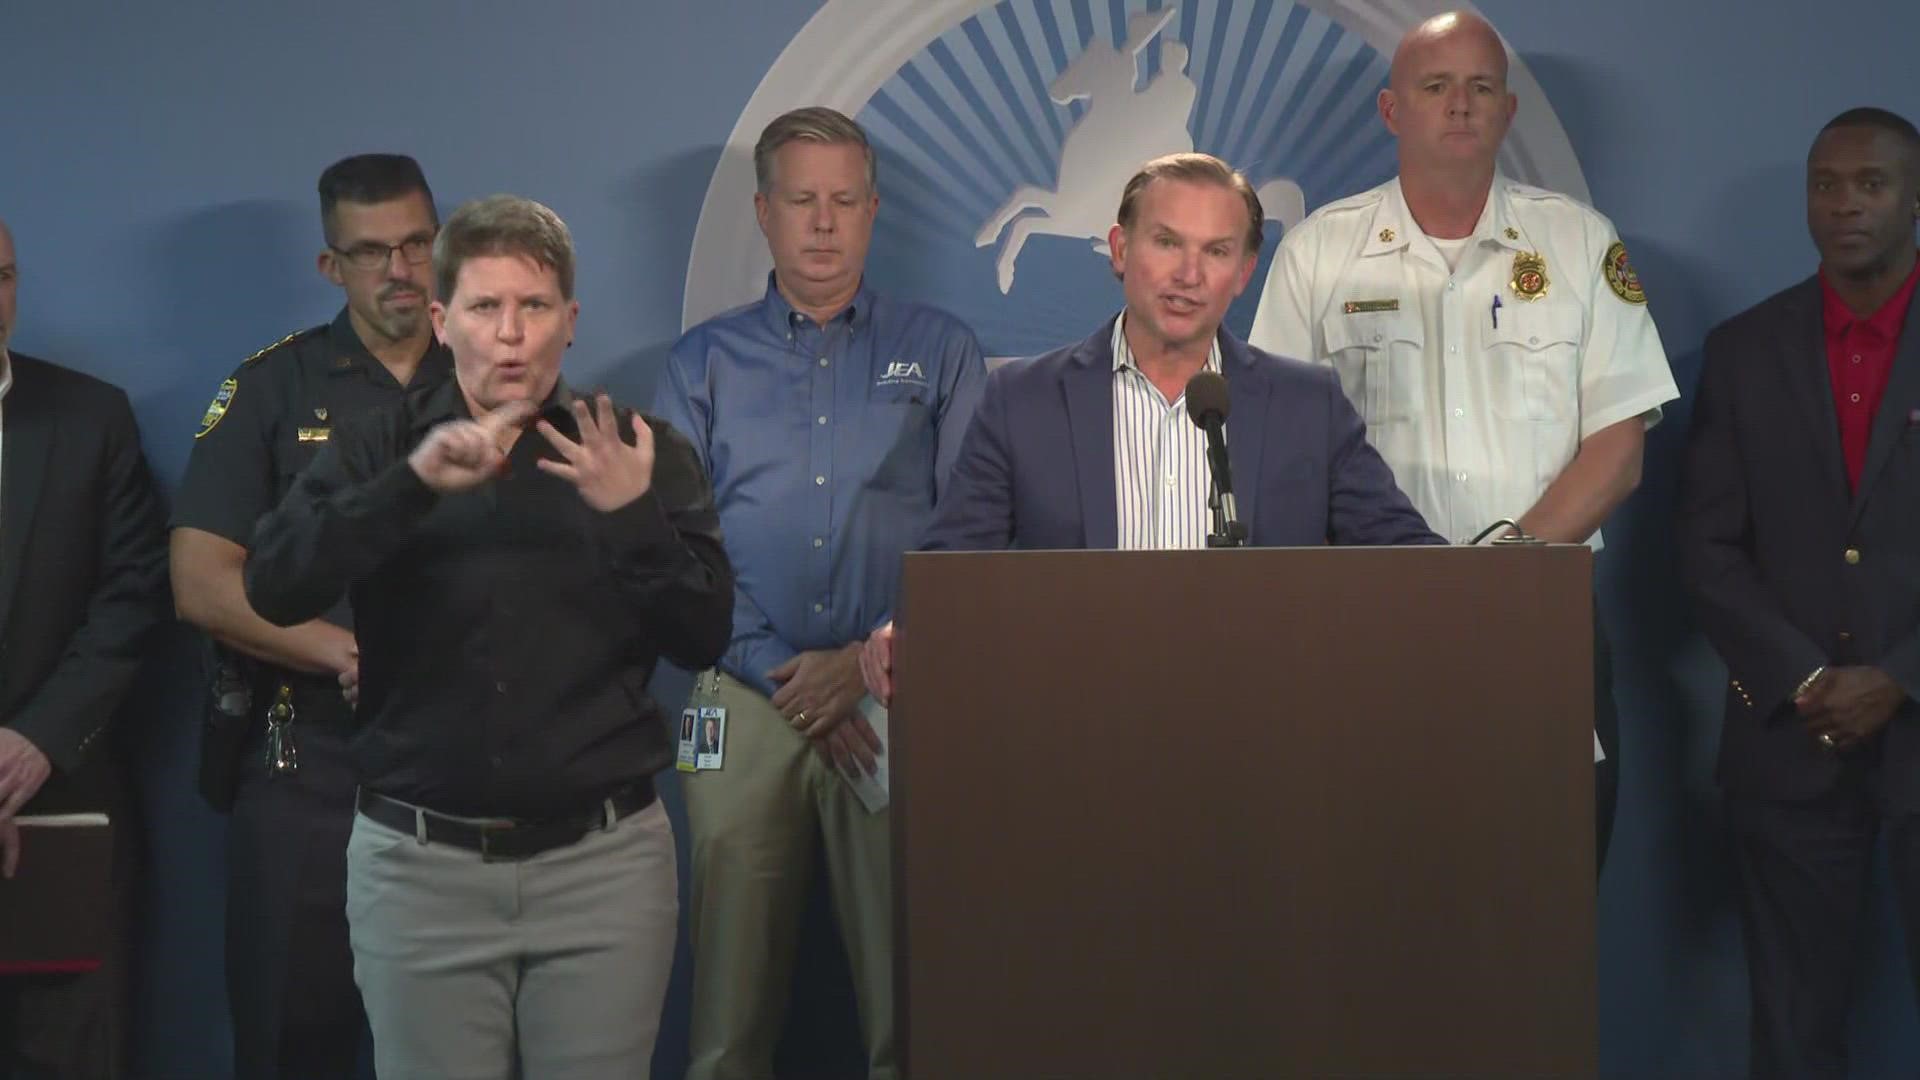 As Hurricane Ian continues to strengthen, officials in Jacksonville gave an update on the city's preparedness efforts.